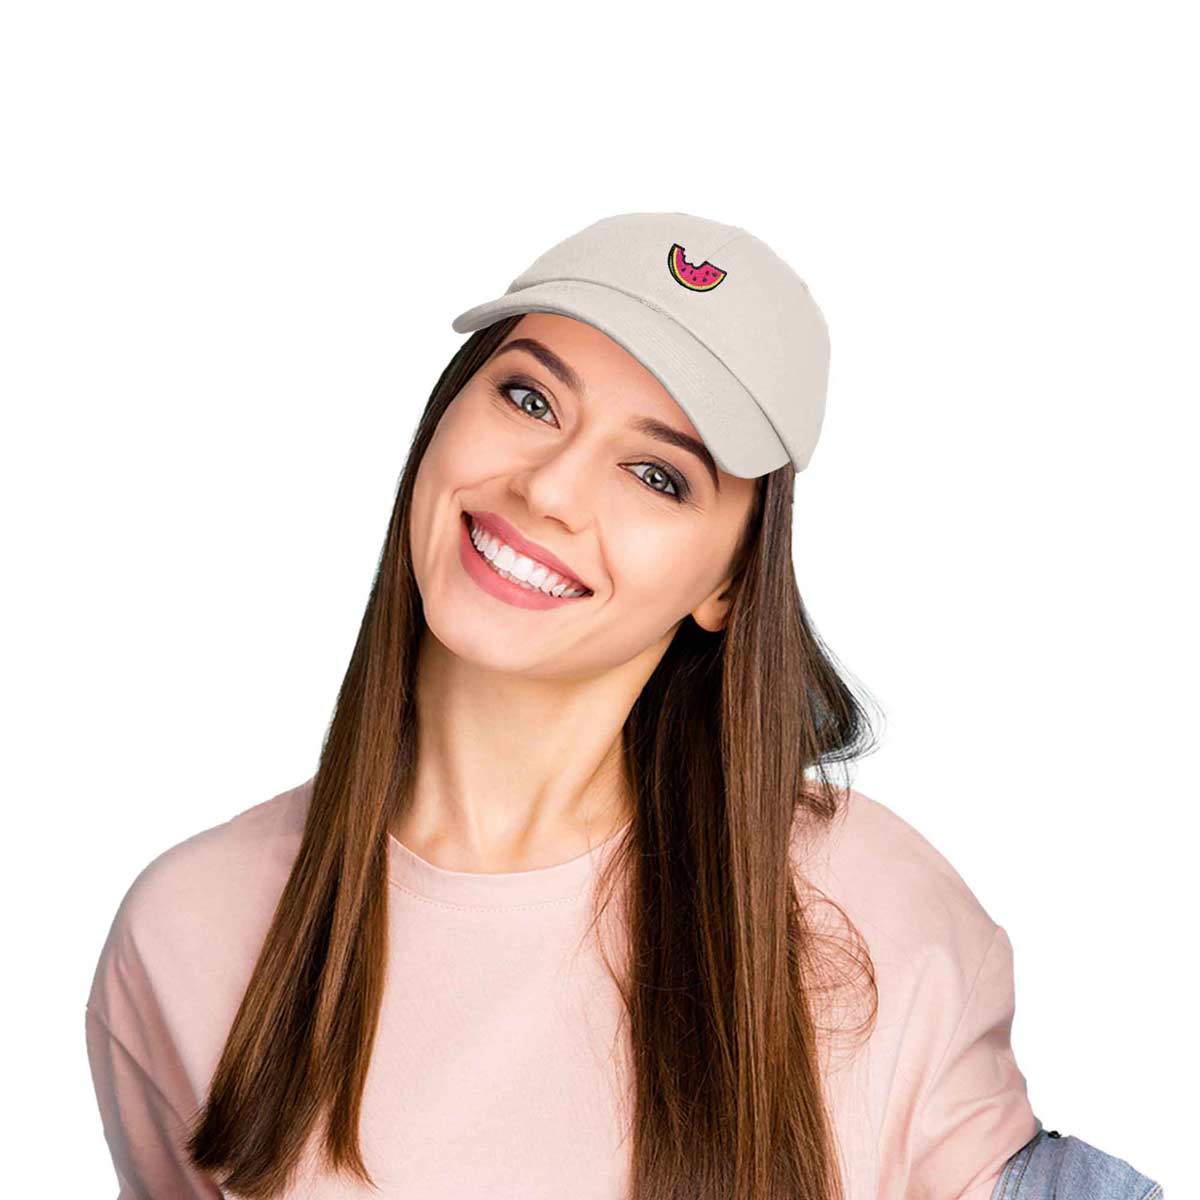 Dalix Watermelon Embroidered Dad Cap Cotton Baseball Hat Women in Light Pink